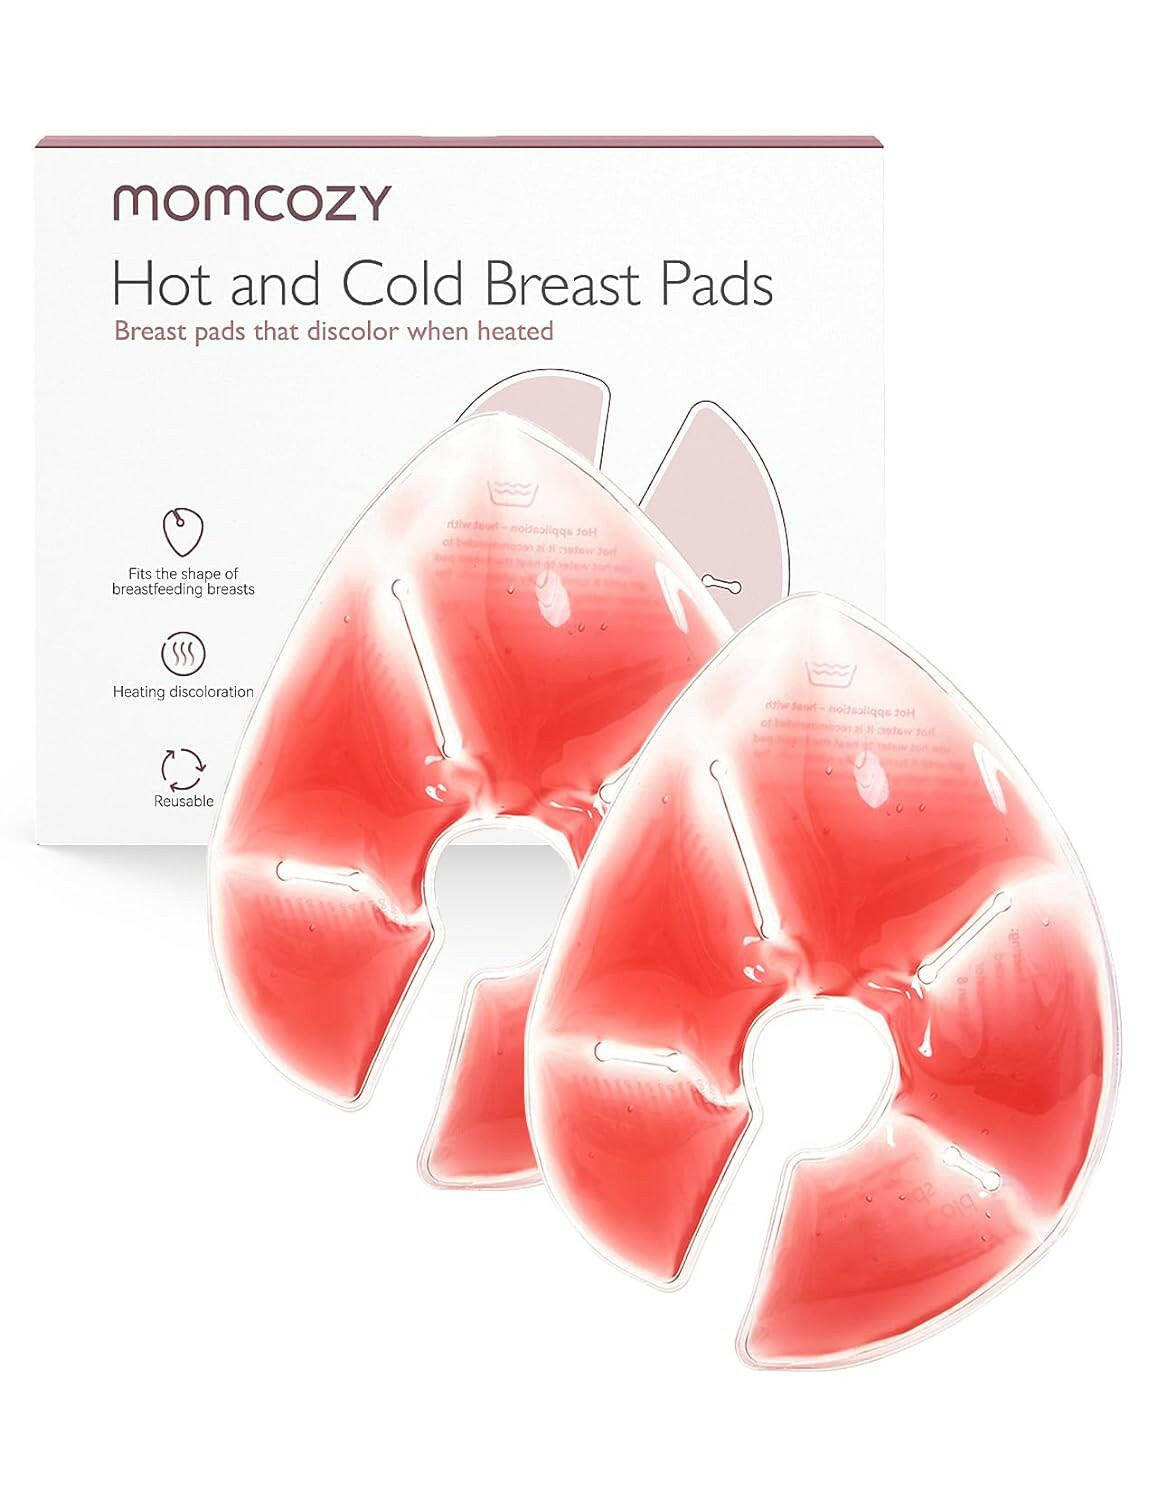 Momcozy Hot and Cold Breast Pads, 2 Pads